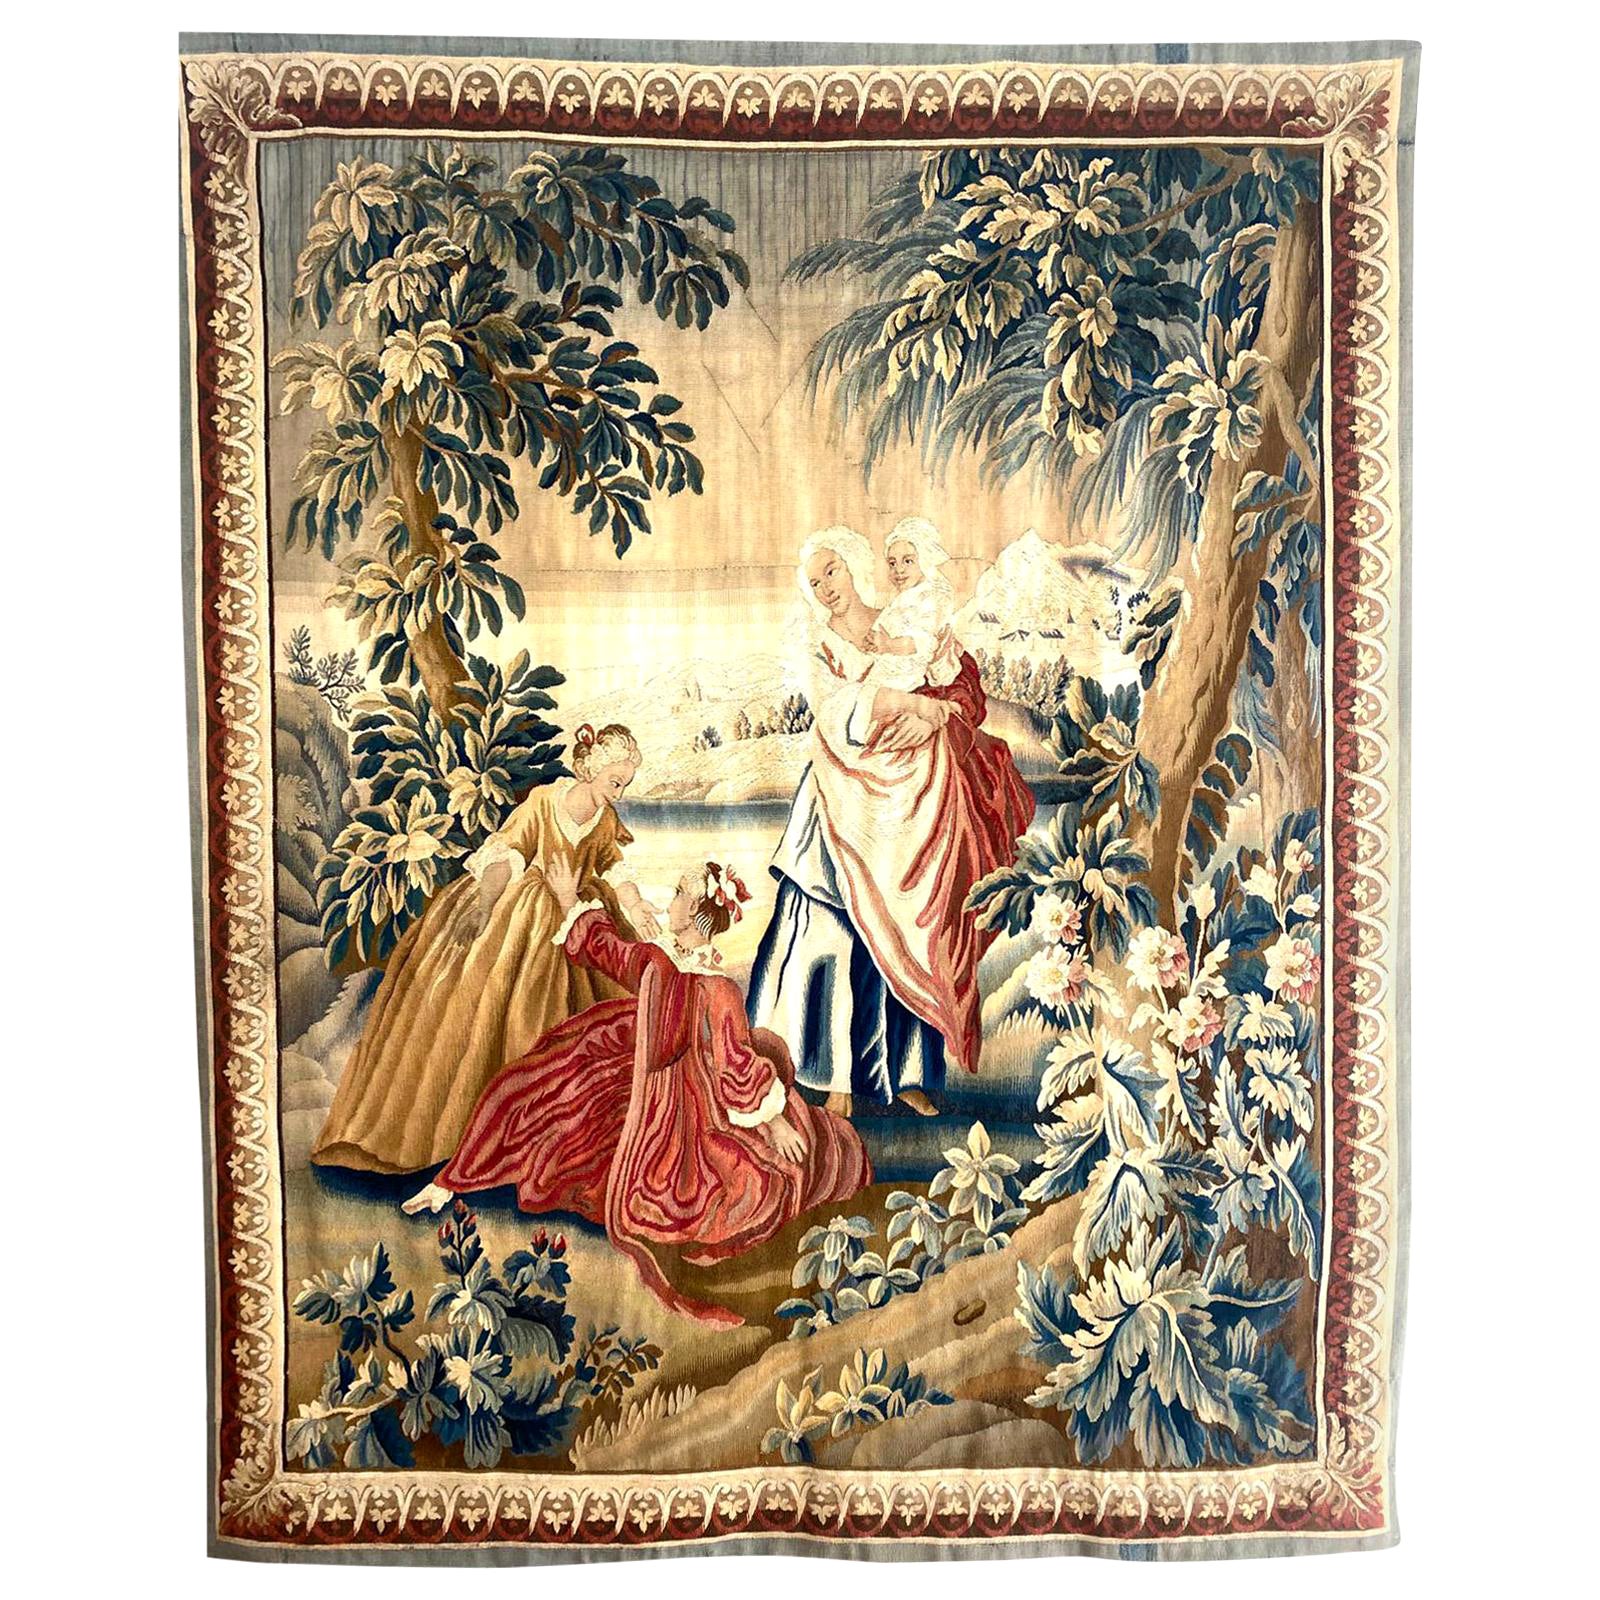 18th Century Sublime Royal Manufacture of Aubusson Tapestry, Louis XVI Period